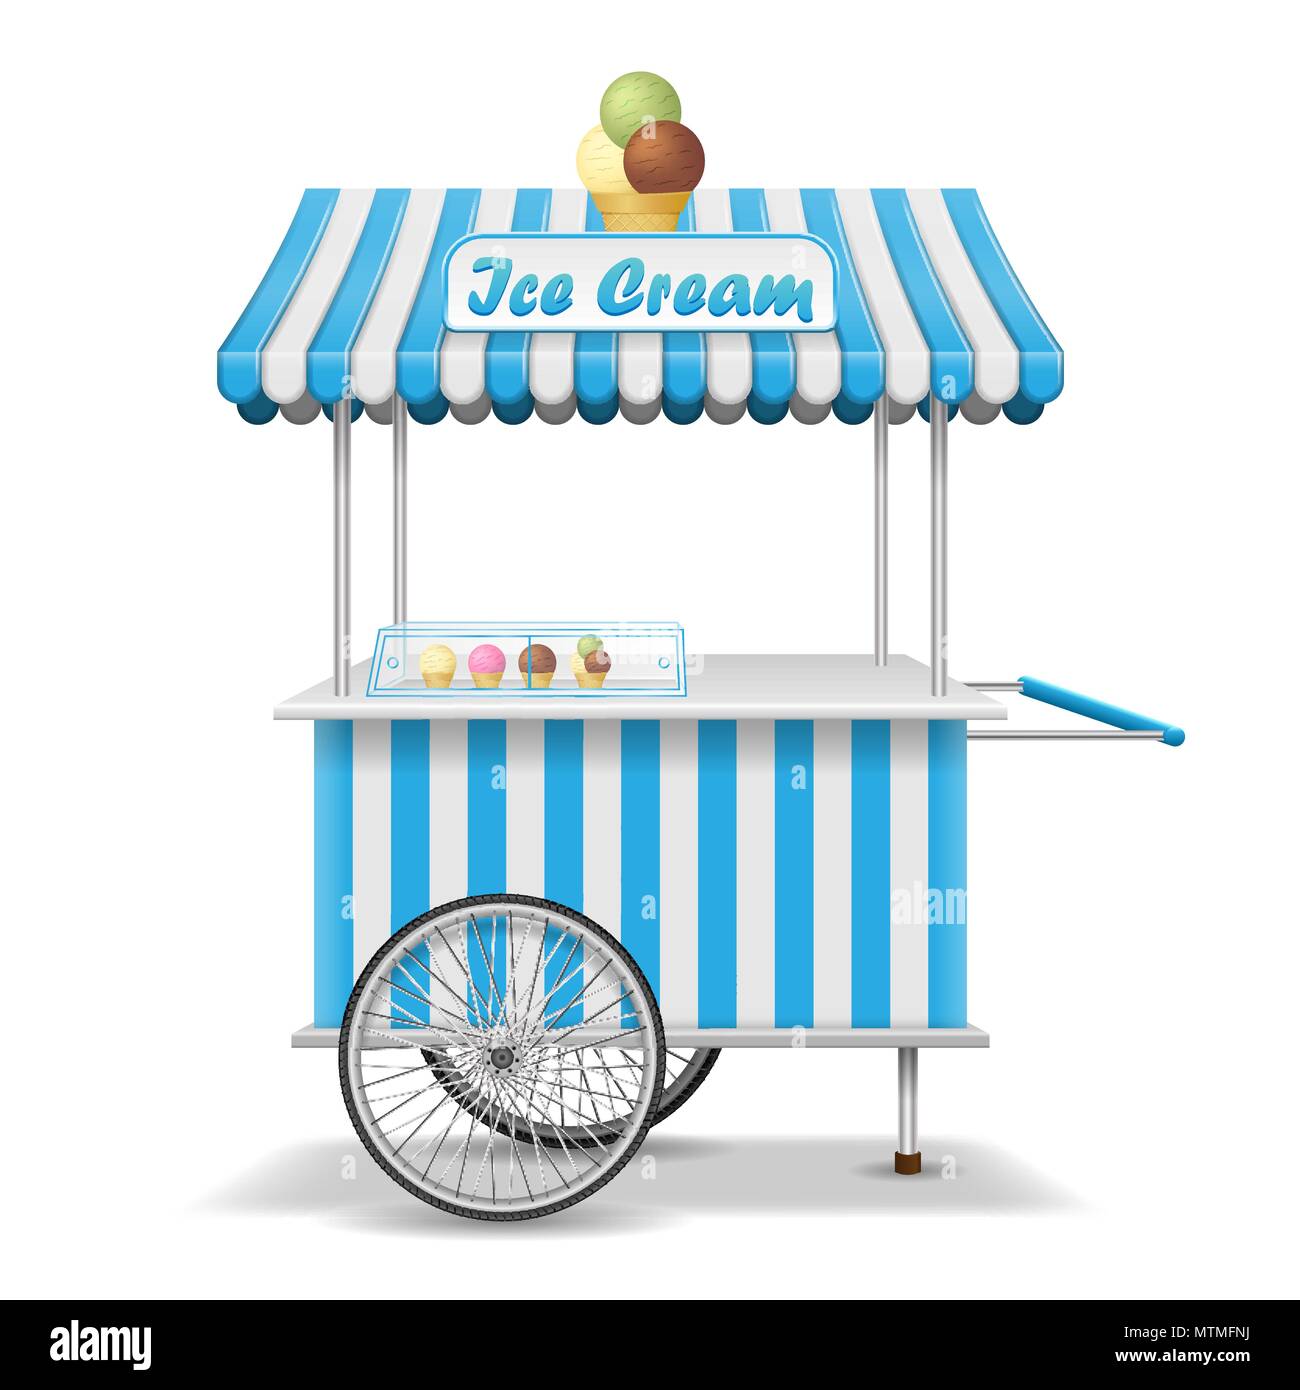 Download Realistic Street Food Cart With Wheels Mobile Pink Ice Cream Market Stall Template Ice Cream Kiosk Store Mockup Vector Illustration Stock Vector Image Art Alamy